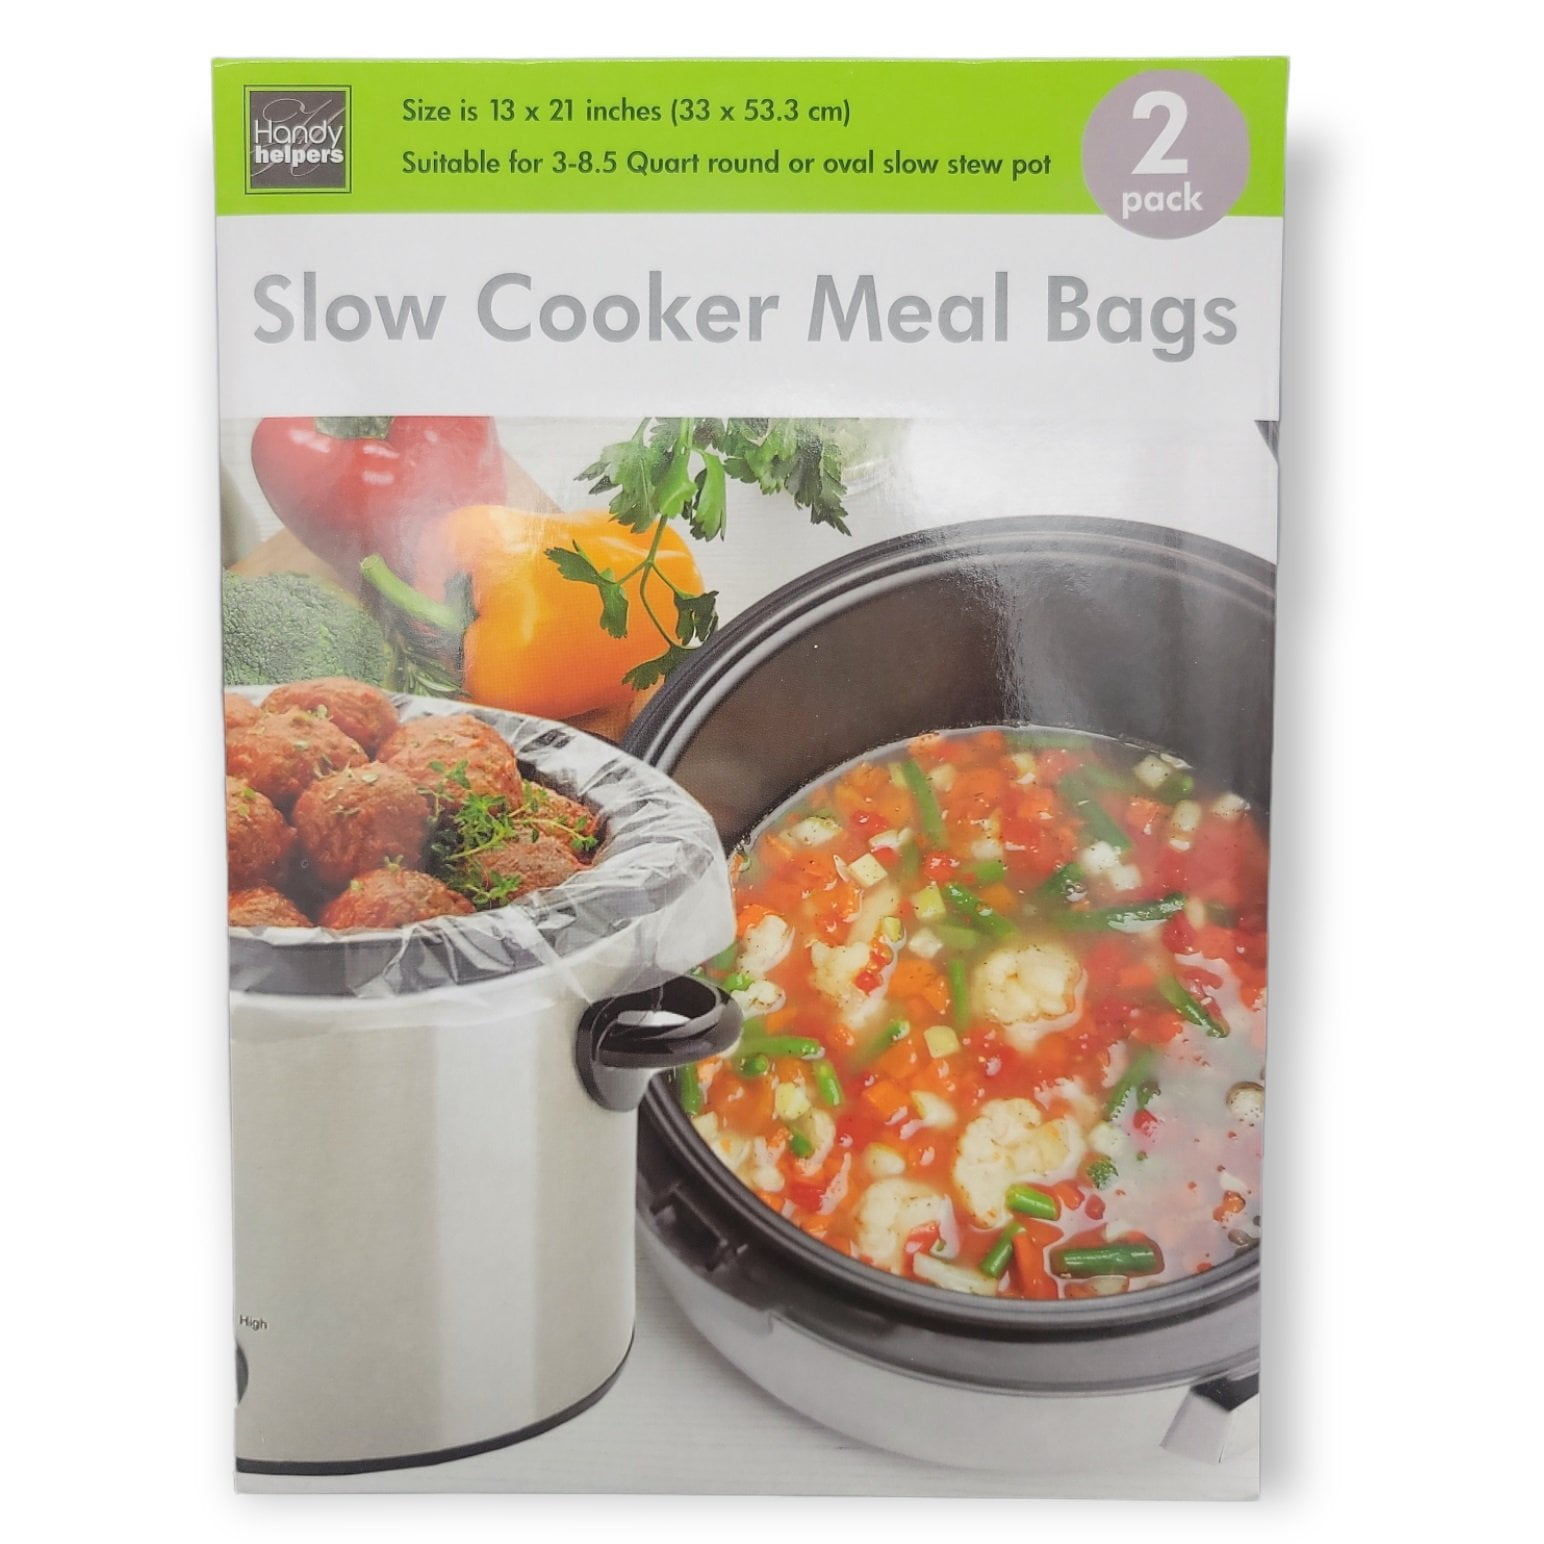 SMARTAKE Slow Cooker Liners, 13 × 21 Inches Disposable Cooking Bags, Easy Clean-Up Plastic Bags, Fit 3qt to 8qt, for Slow Cooker, Crockpot, Aluminum